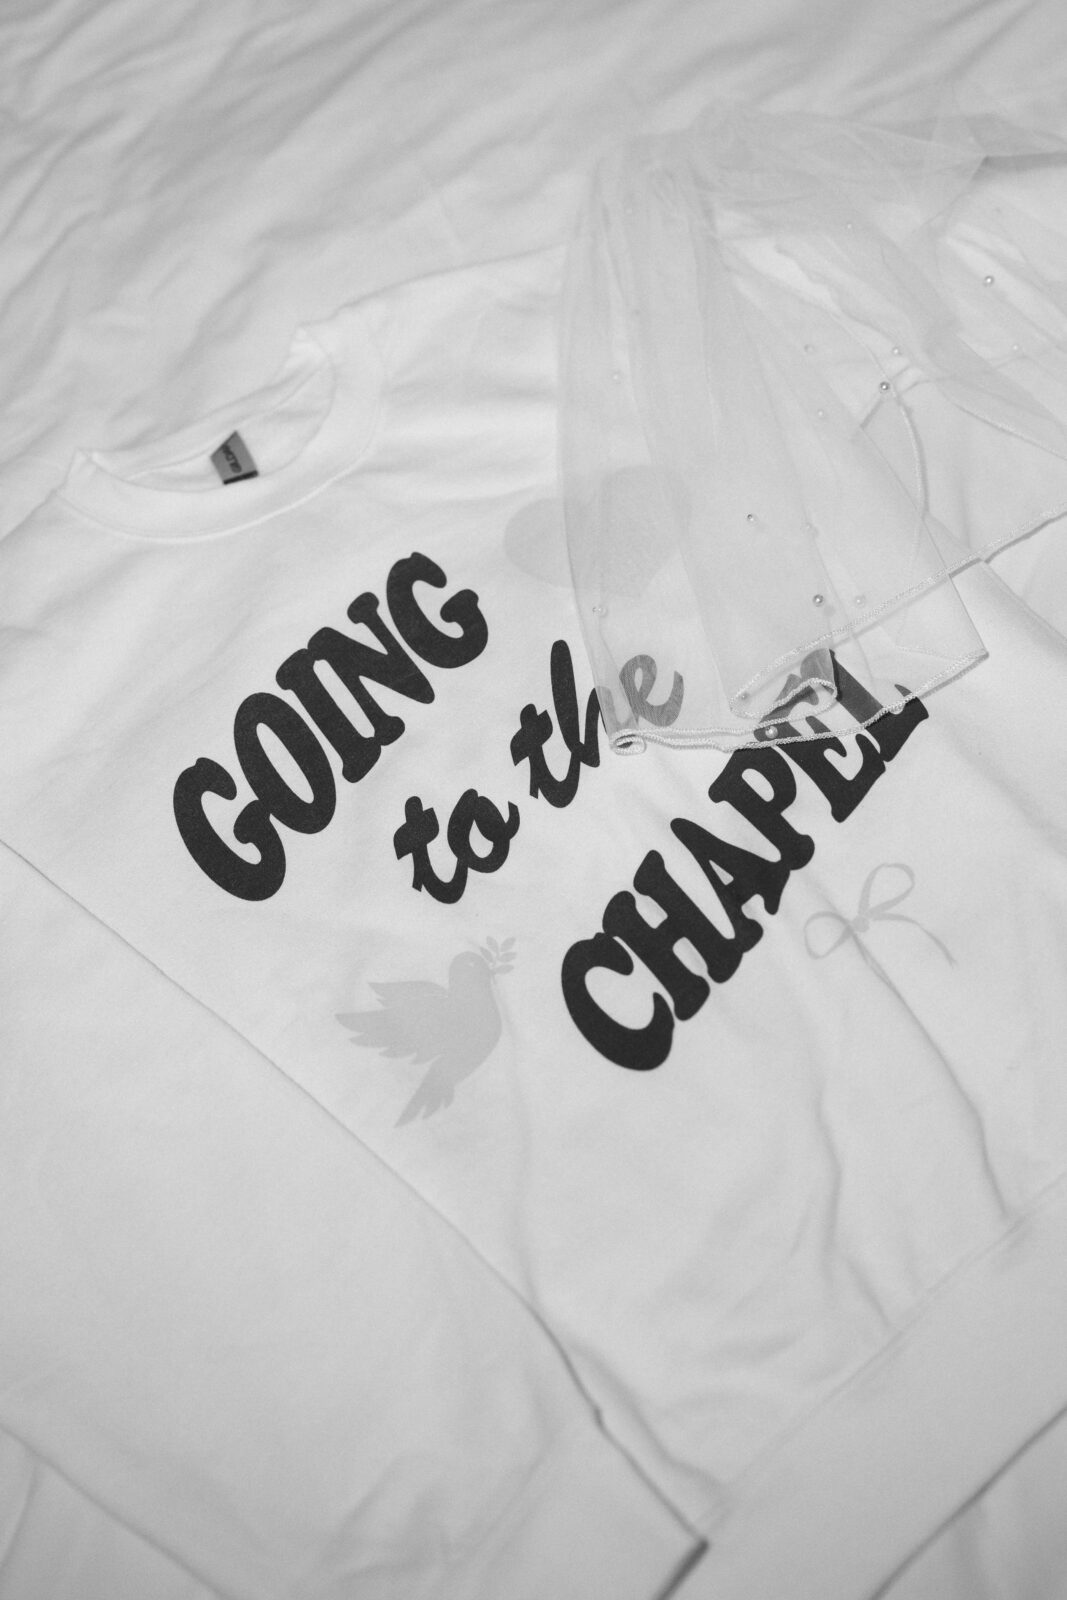 Going to the Chapel bridal sweatshirt from a Las Vegas elopement